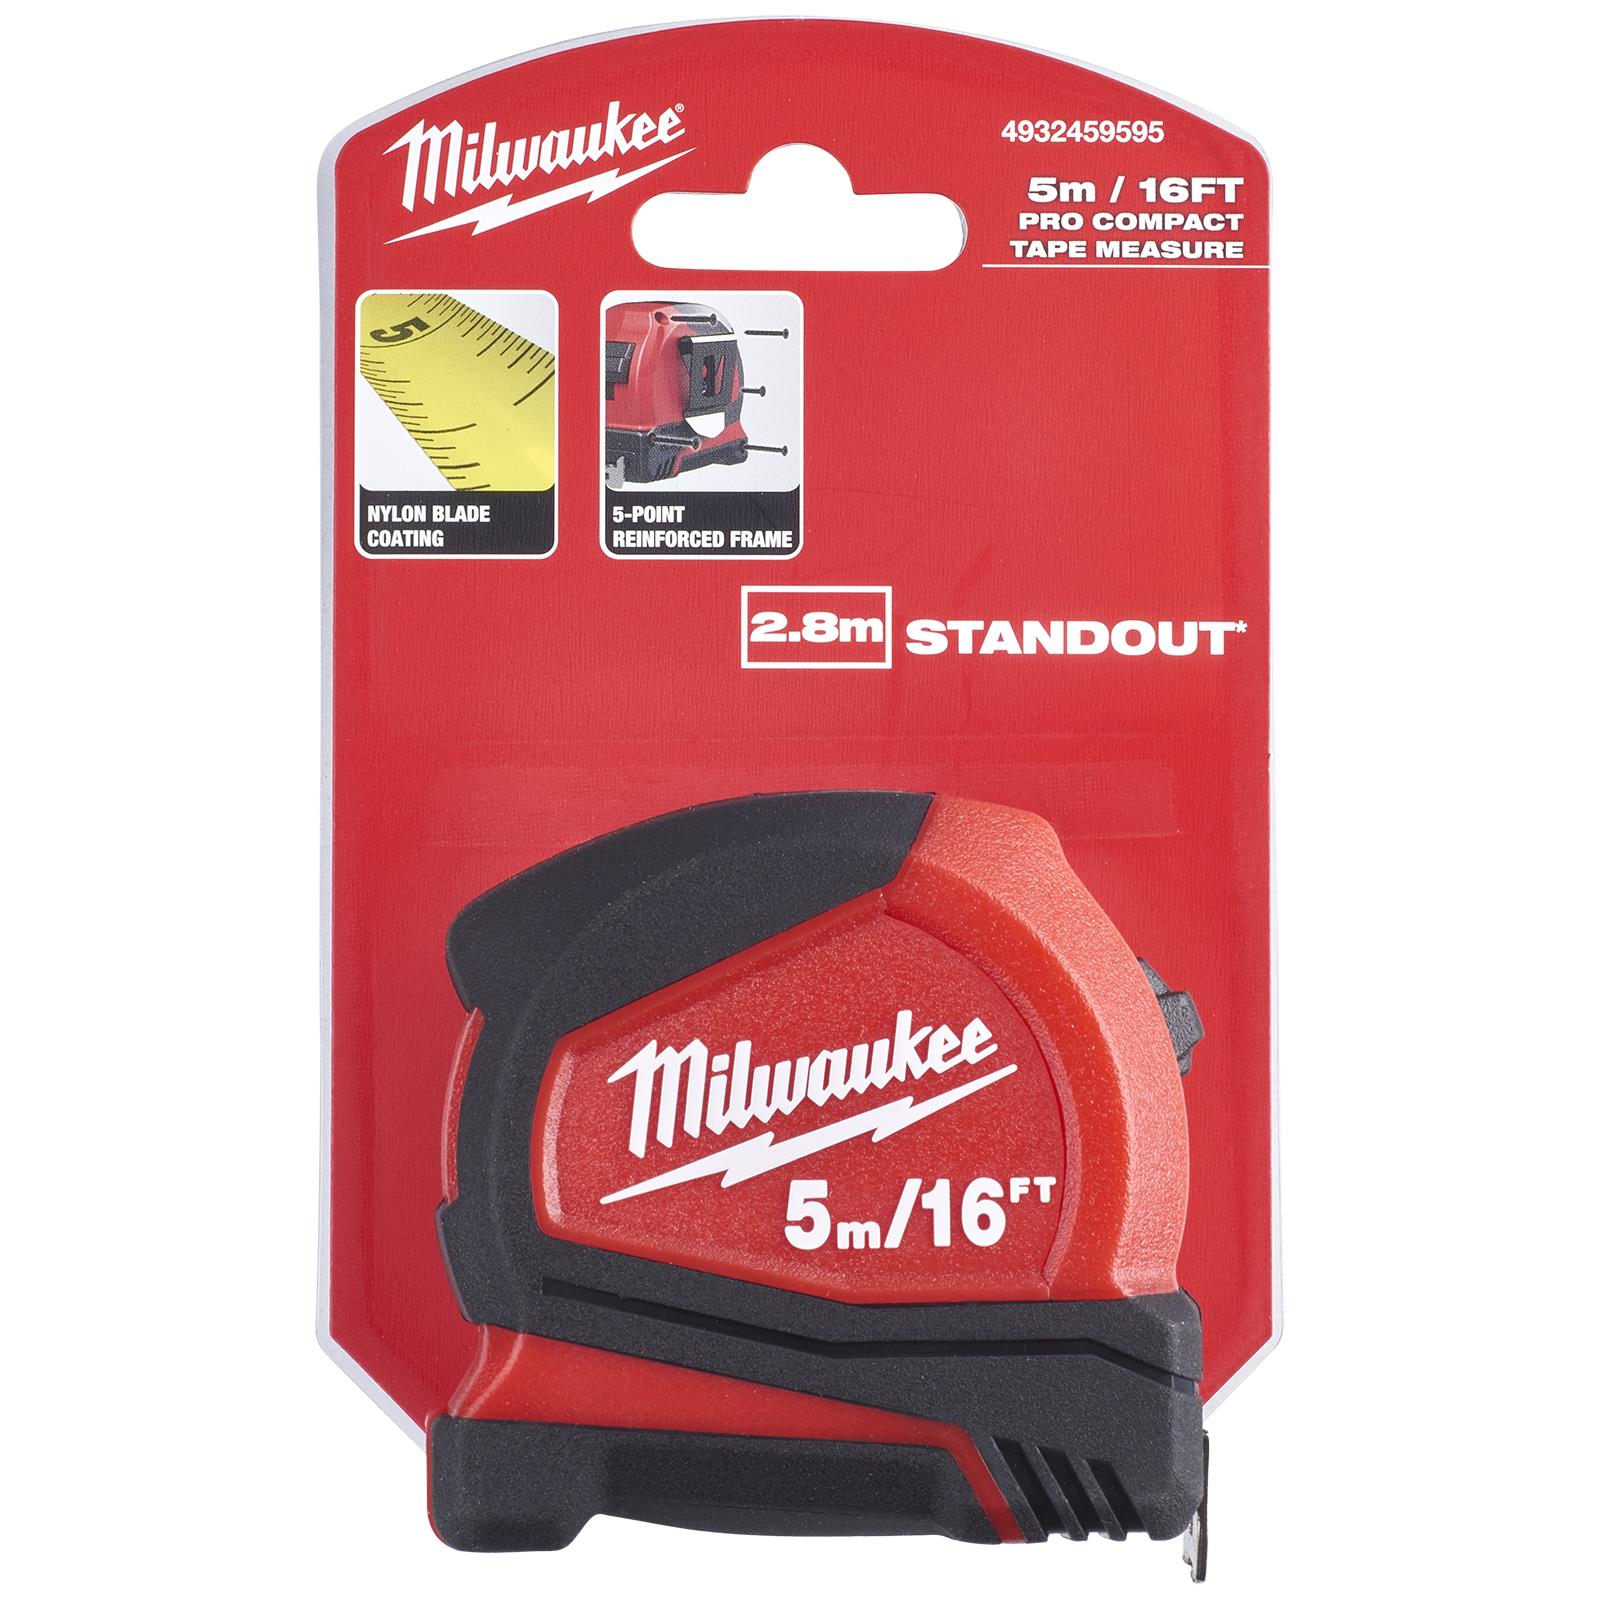 Milwaukee Tape Measure 5m 16ft Metric Imperial Pro Compact Pocket Tape 25mm Blade Width